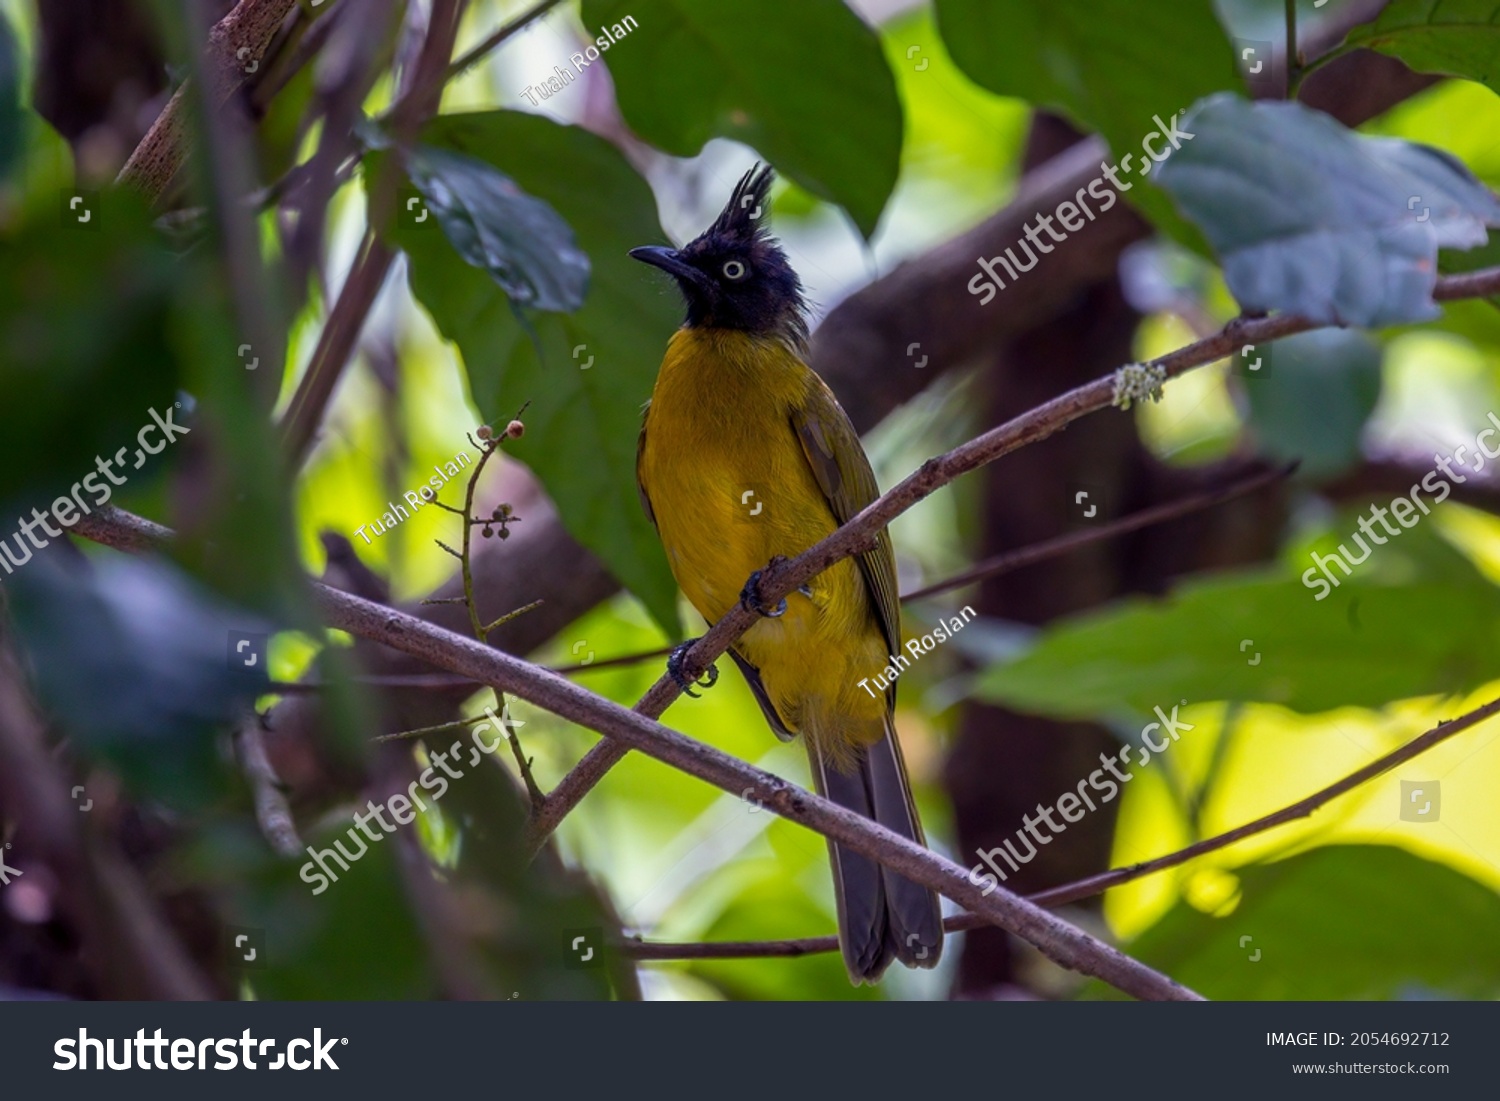 Black-crested Bulbul - Greenish-yellow bulbul with a dark head and crest - perched at the branch in natural habitat. #2054692712